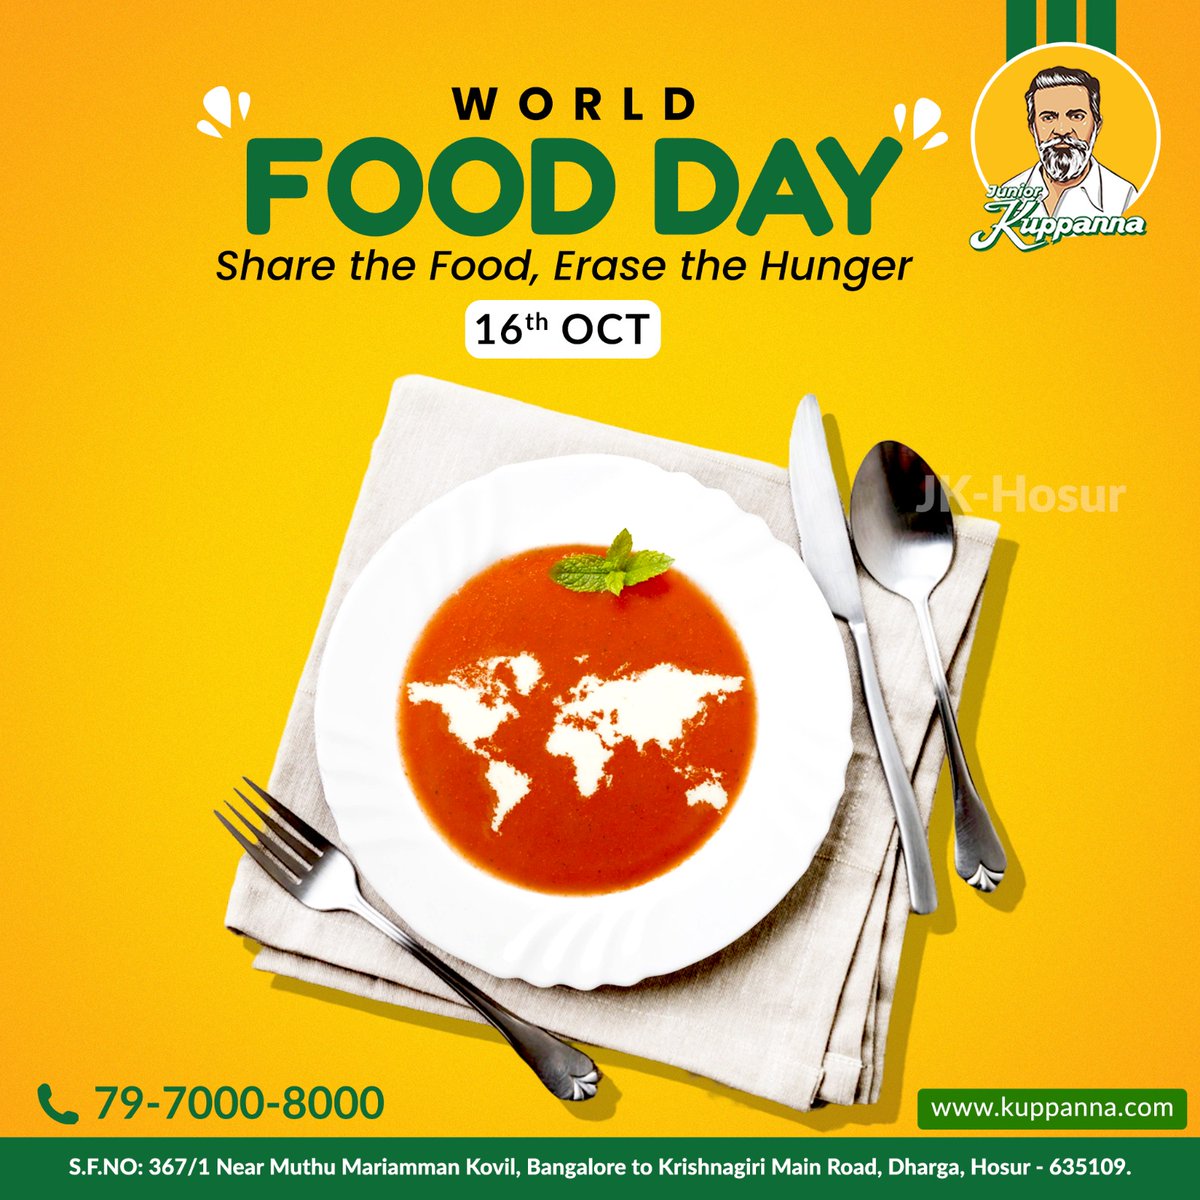 Small actions can have a big impact. Let's reduce food waste and ensure no one goes to bed hungry. World Food Day !!!

#WorldFoodDay #worldfoodday2023 #worldfoodday #foodday #hunger #HungerNoMore #earth #food #juniorkuppanna #sharefood #explorefood #october #October2023